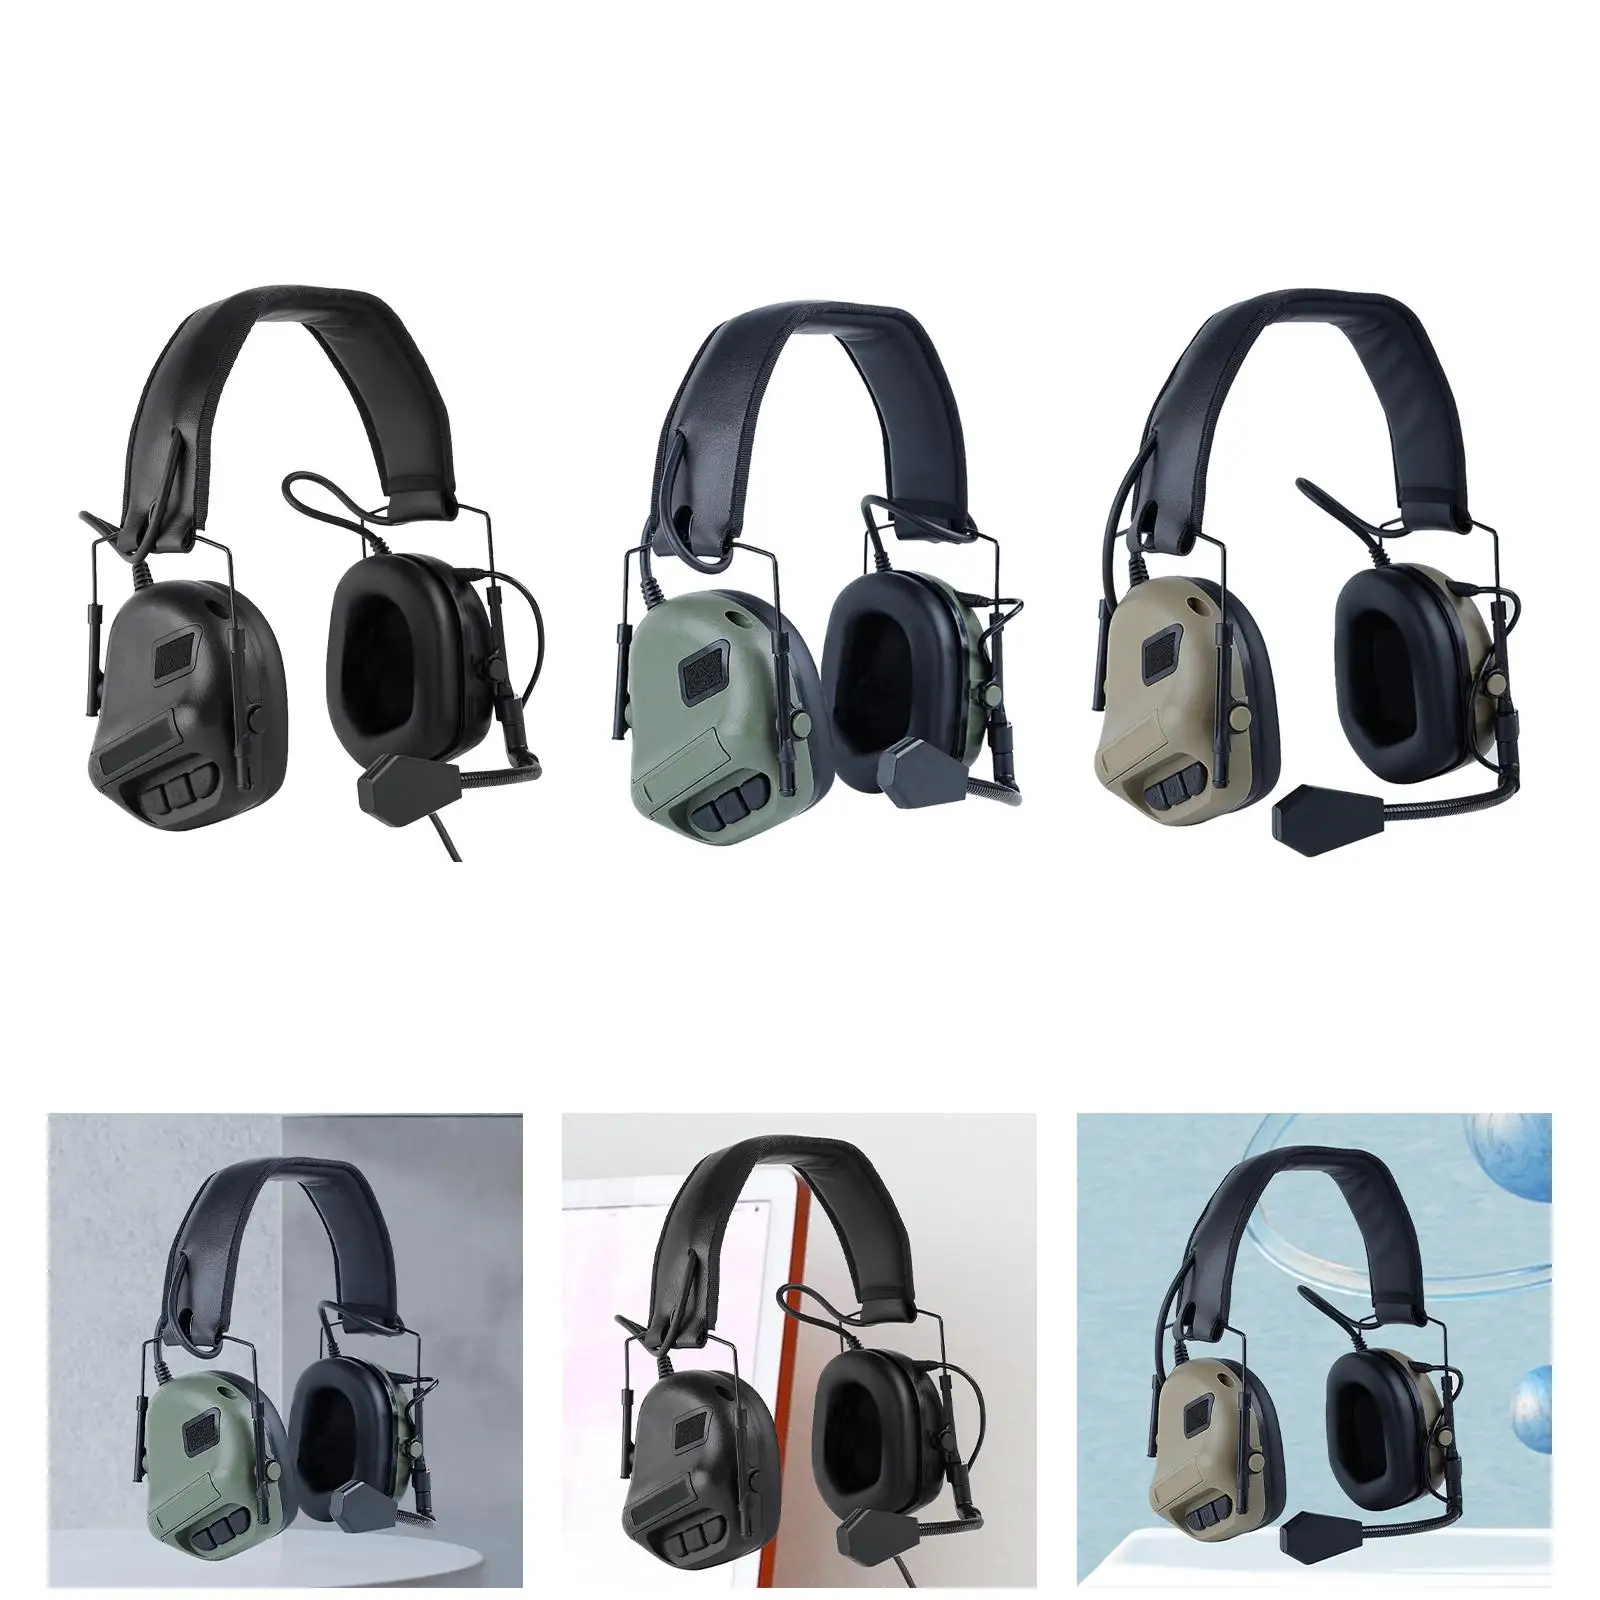 Hearing Ear Protection Foldable Soft Lightweight Protective Earmuffs for Manufacturing Lawn Mowing Office Studying Construction